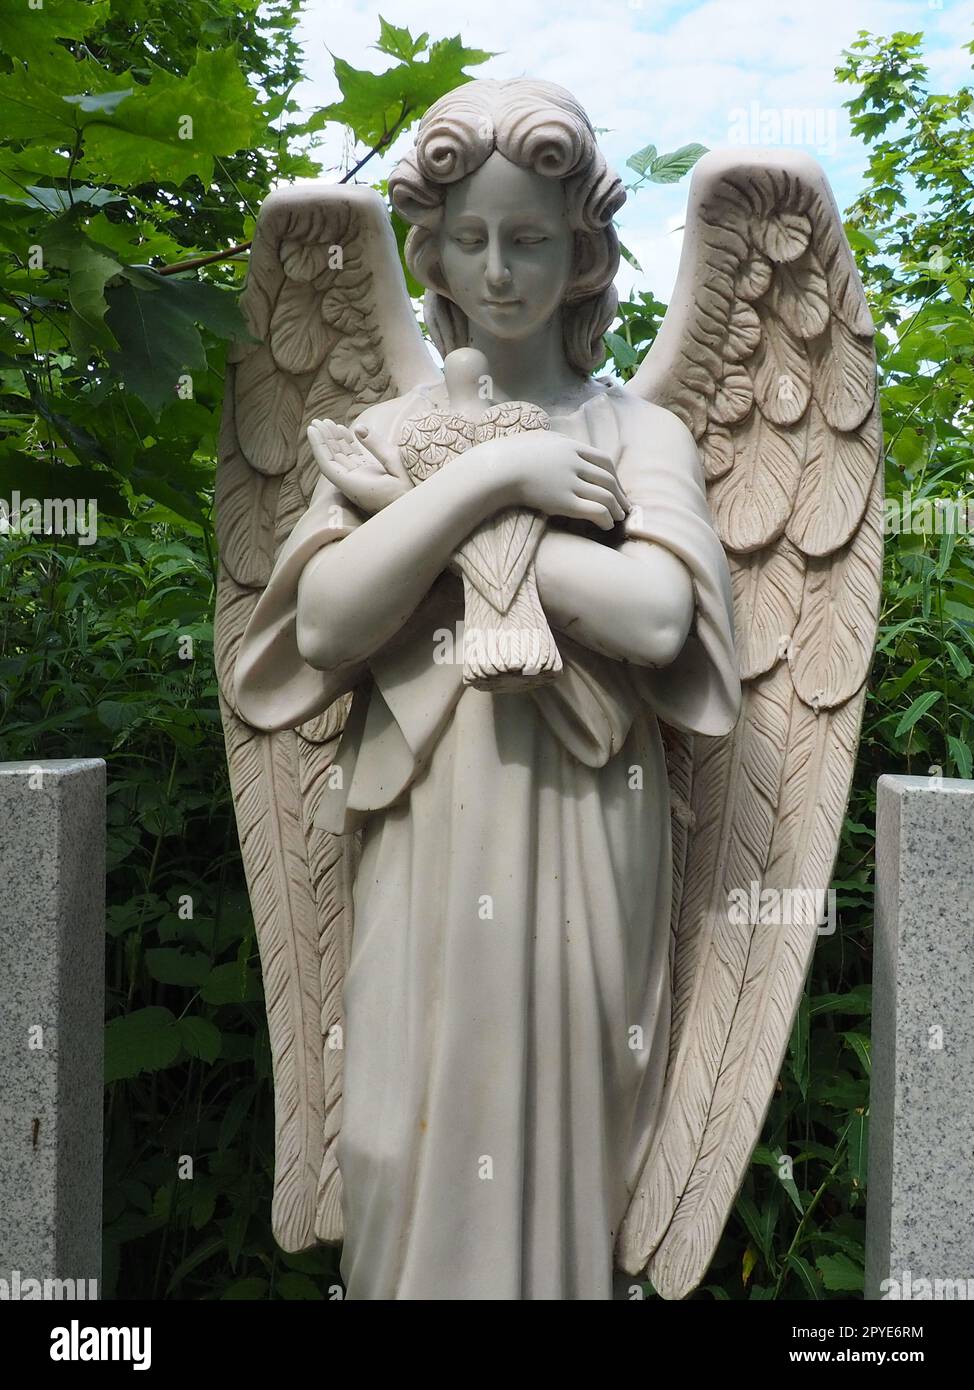 An angel with a dove. Sculpture in the cemetery. The figure of an angel with wings holding a bird in his arms. Lamentation for the deceased. Headstone monument on a Christian grave. Sadness and sorrow Stock Photo